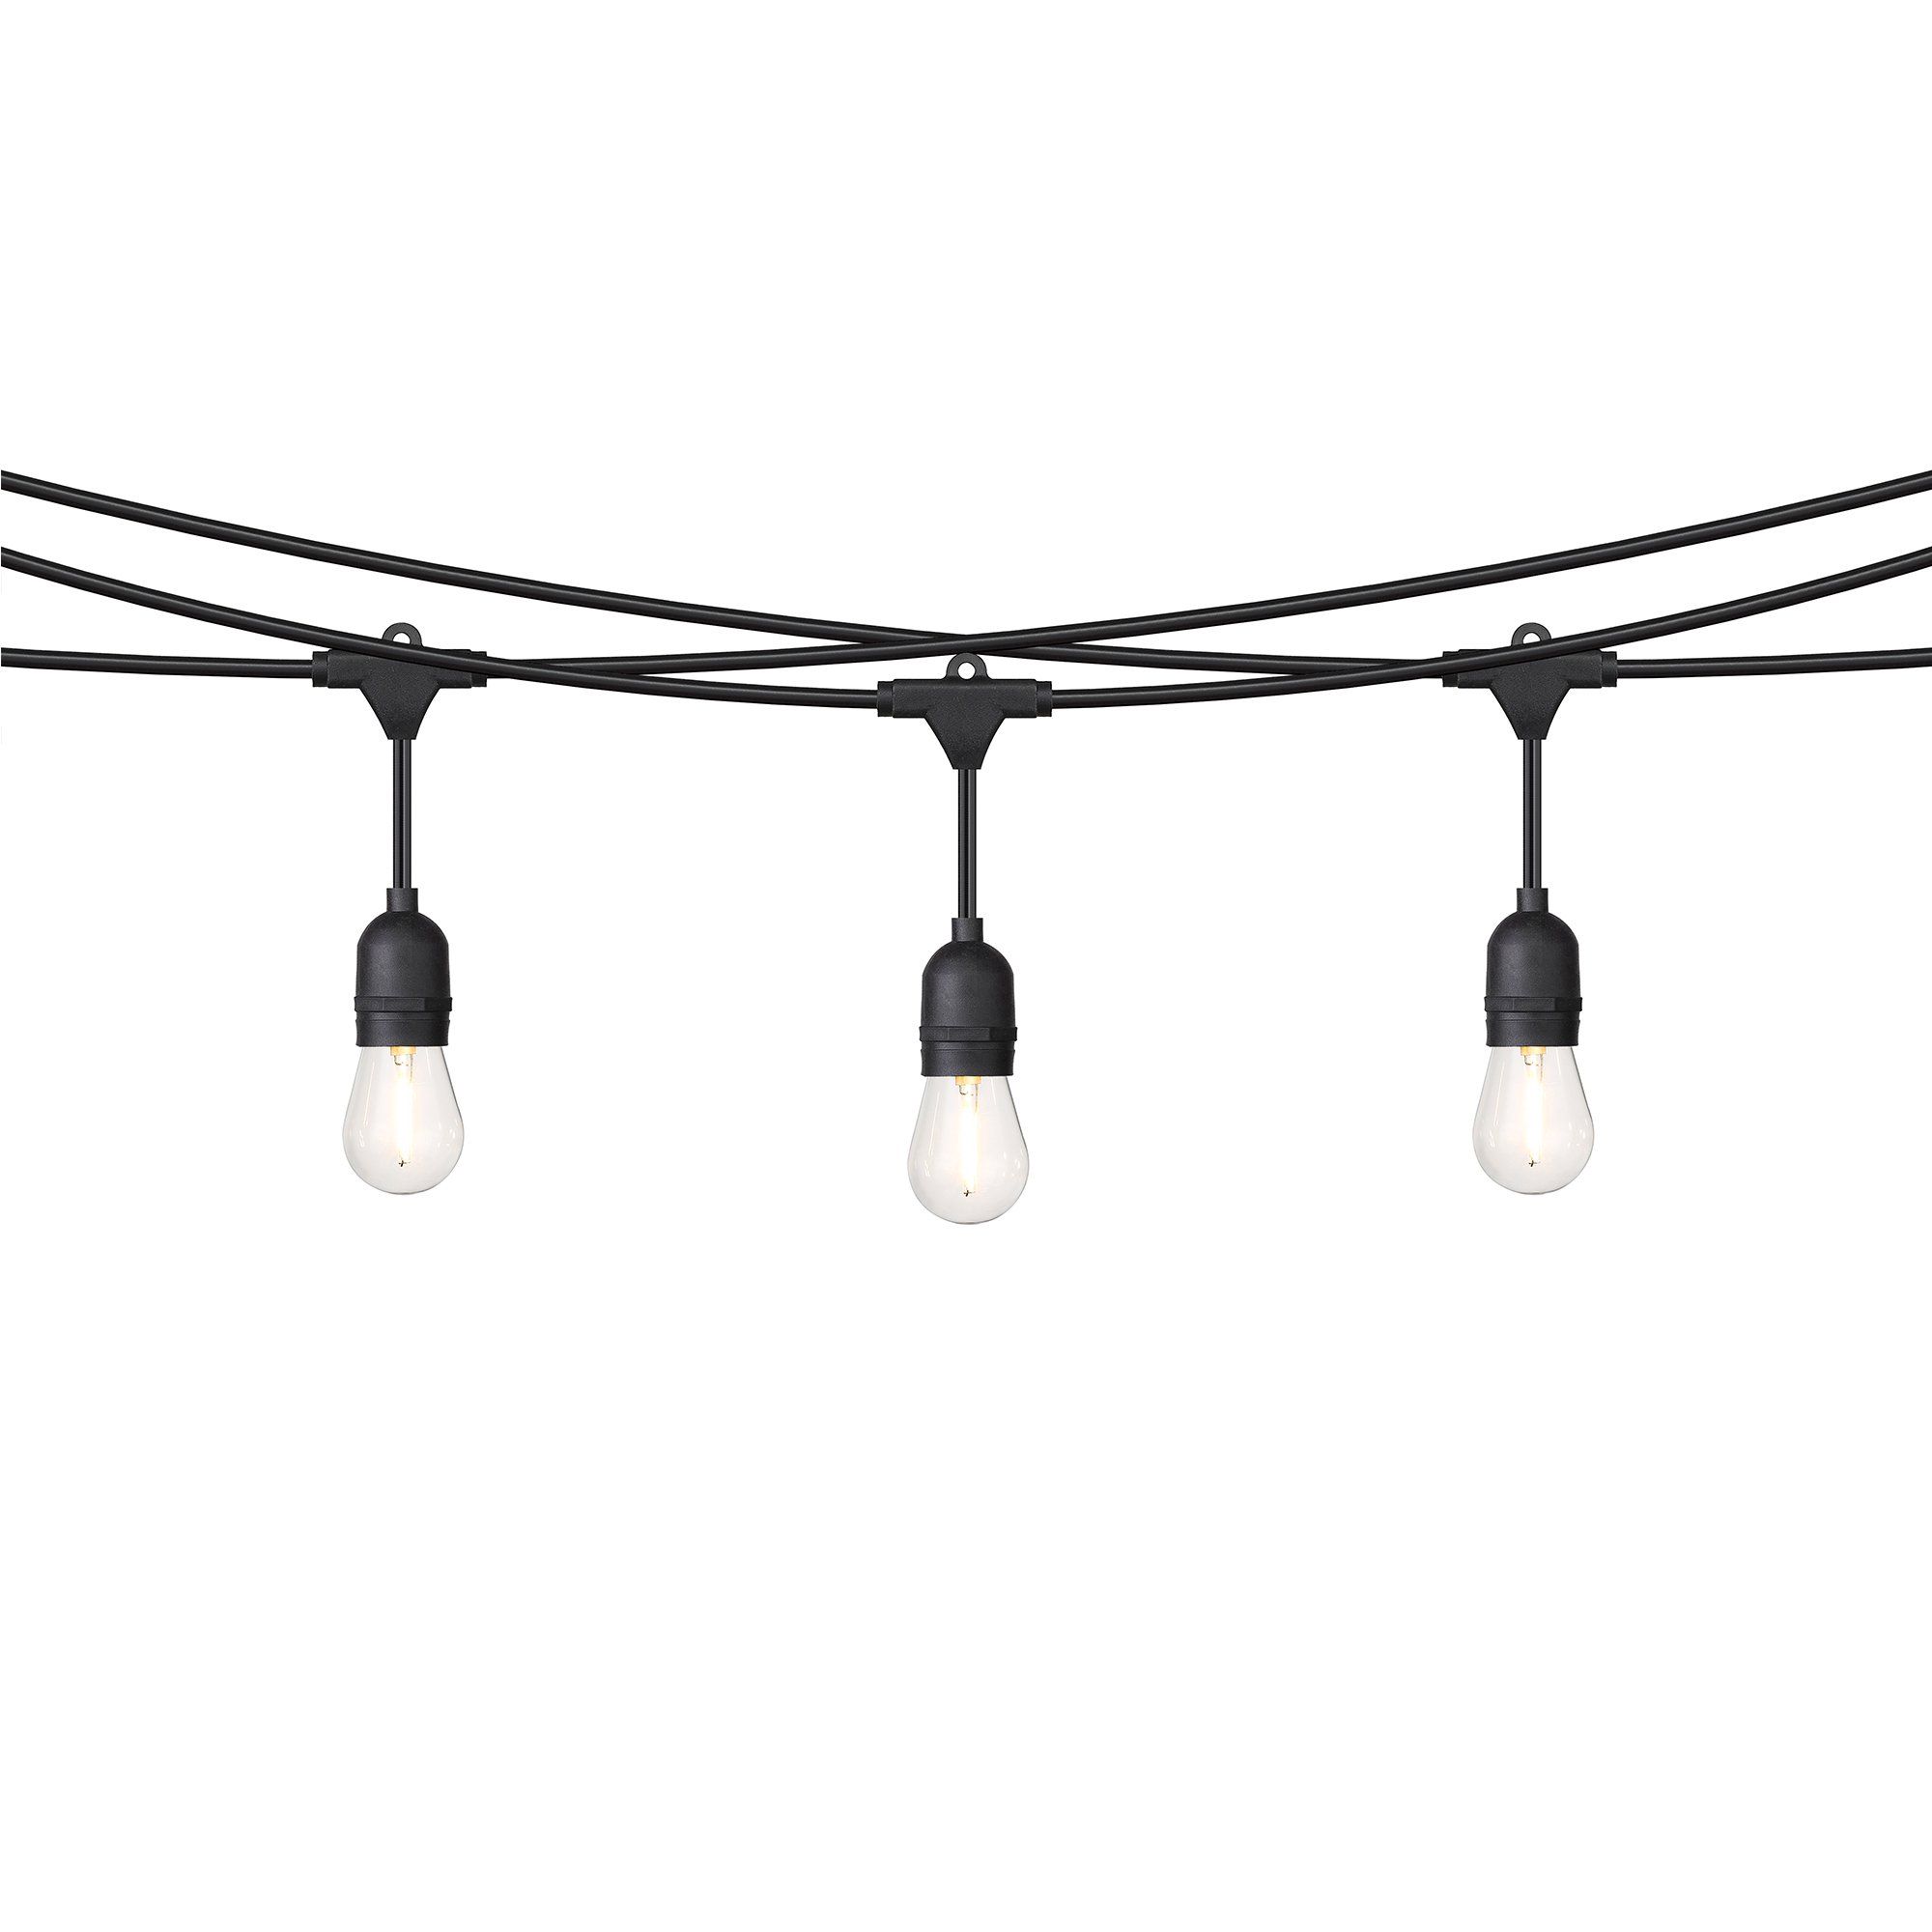 Ove Decors 48 ft. S14 String Lights with Black Wire and Plastic Bulbs | Walmart (US)